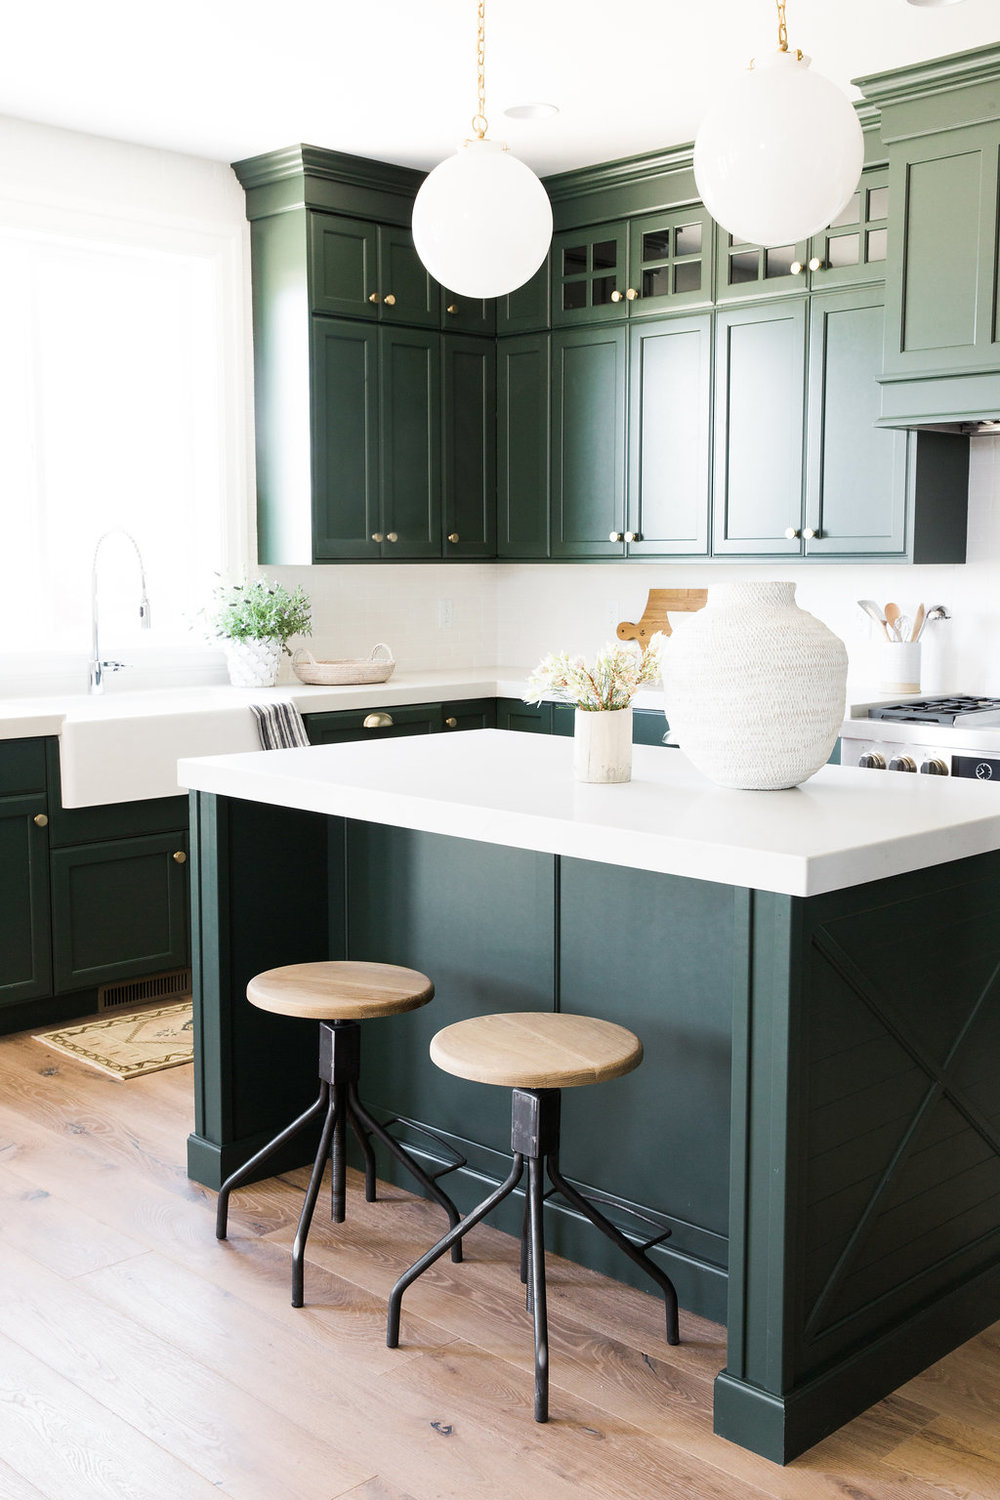 Calling It: Olive Green Kitchens Will Be Everywhere in 